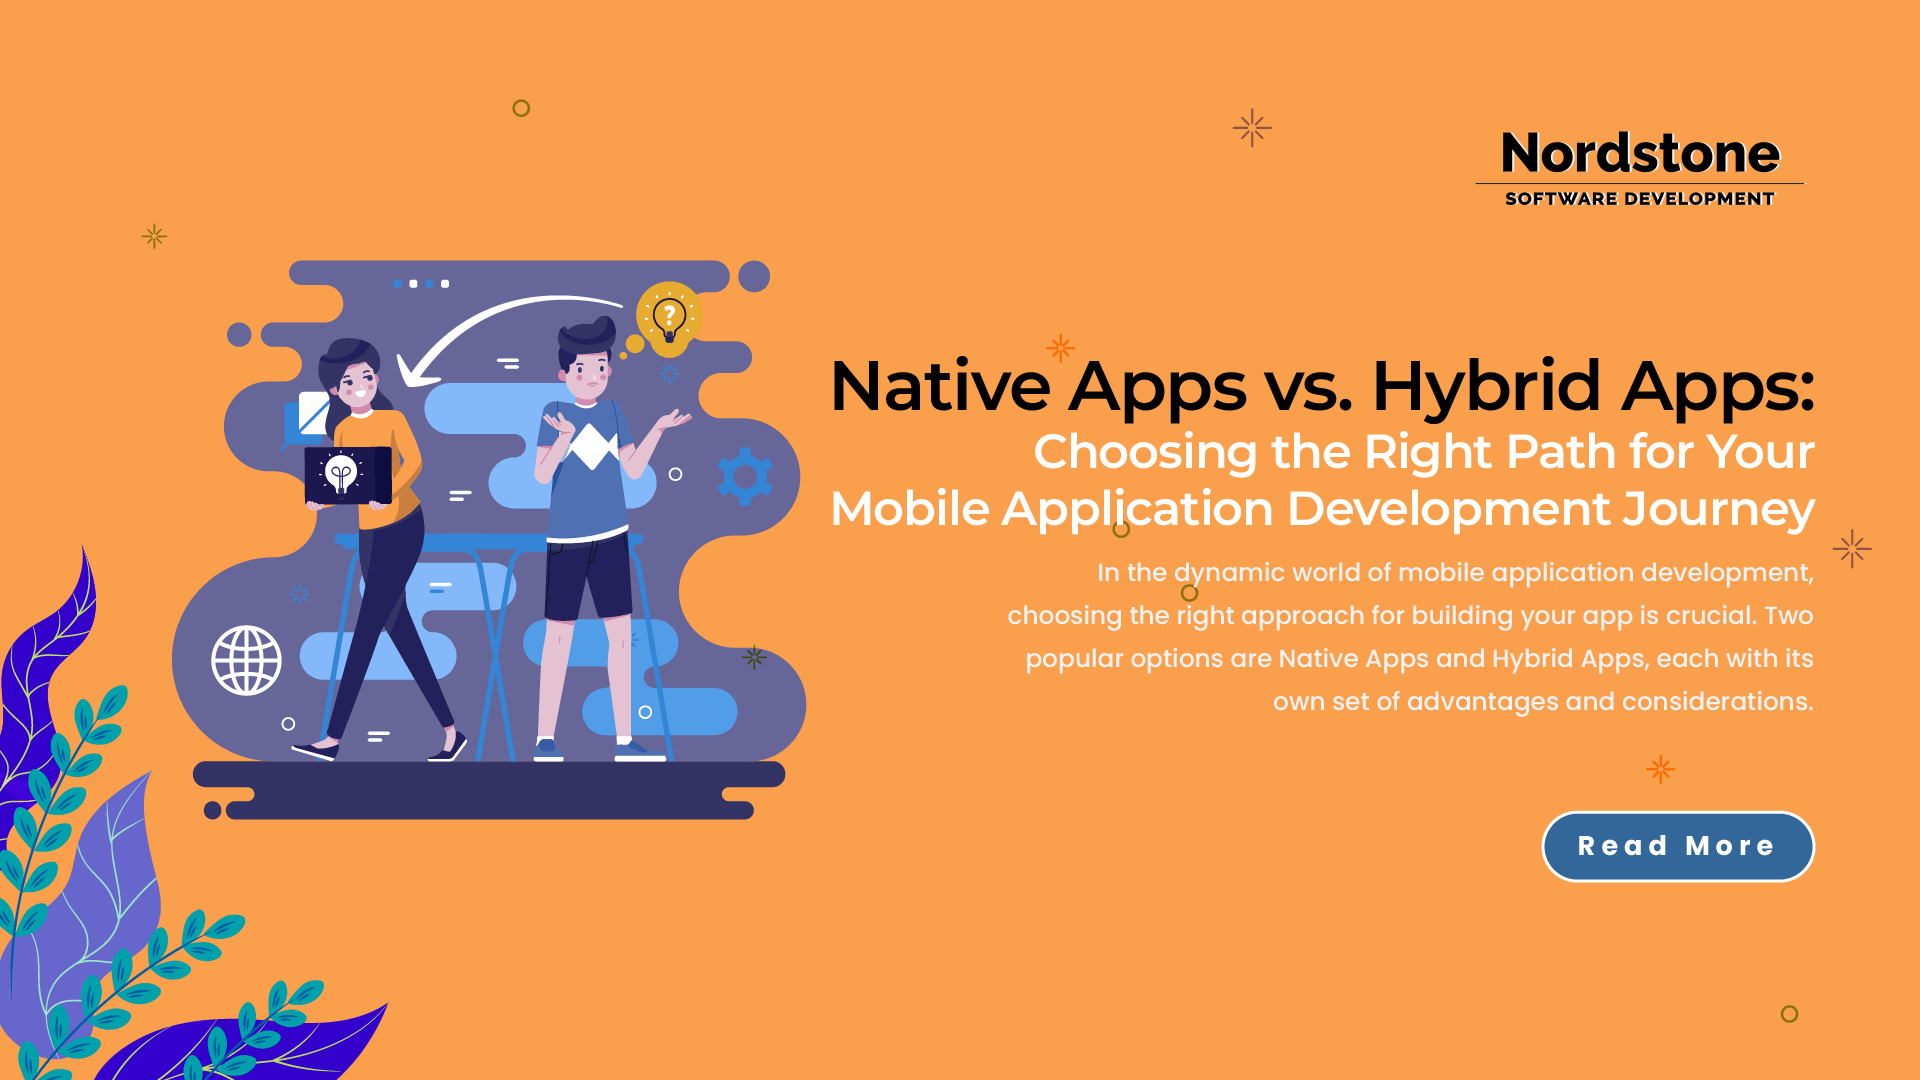 Native Apps vs Hybrid Apps - Choosing the Right Path for Your Mobile Application Development Journey